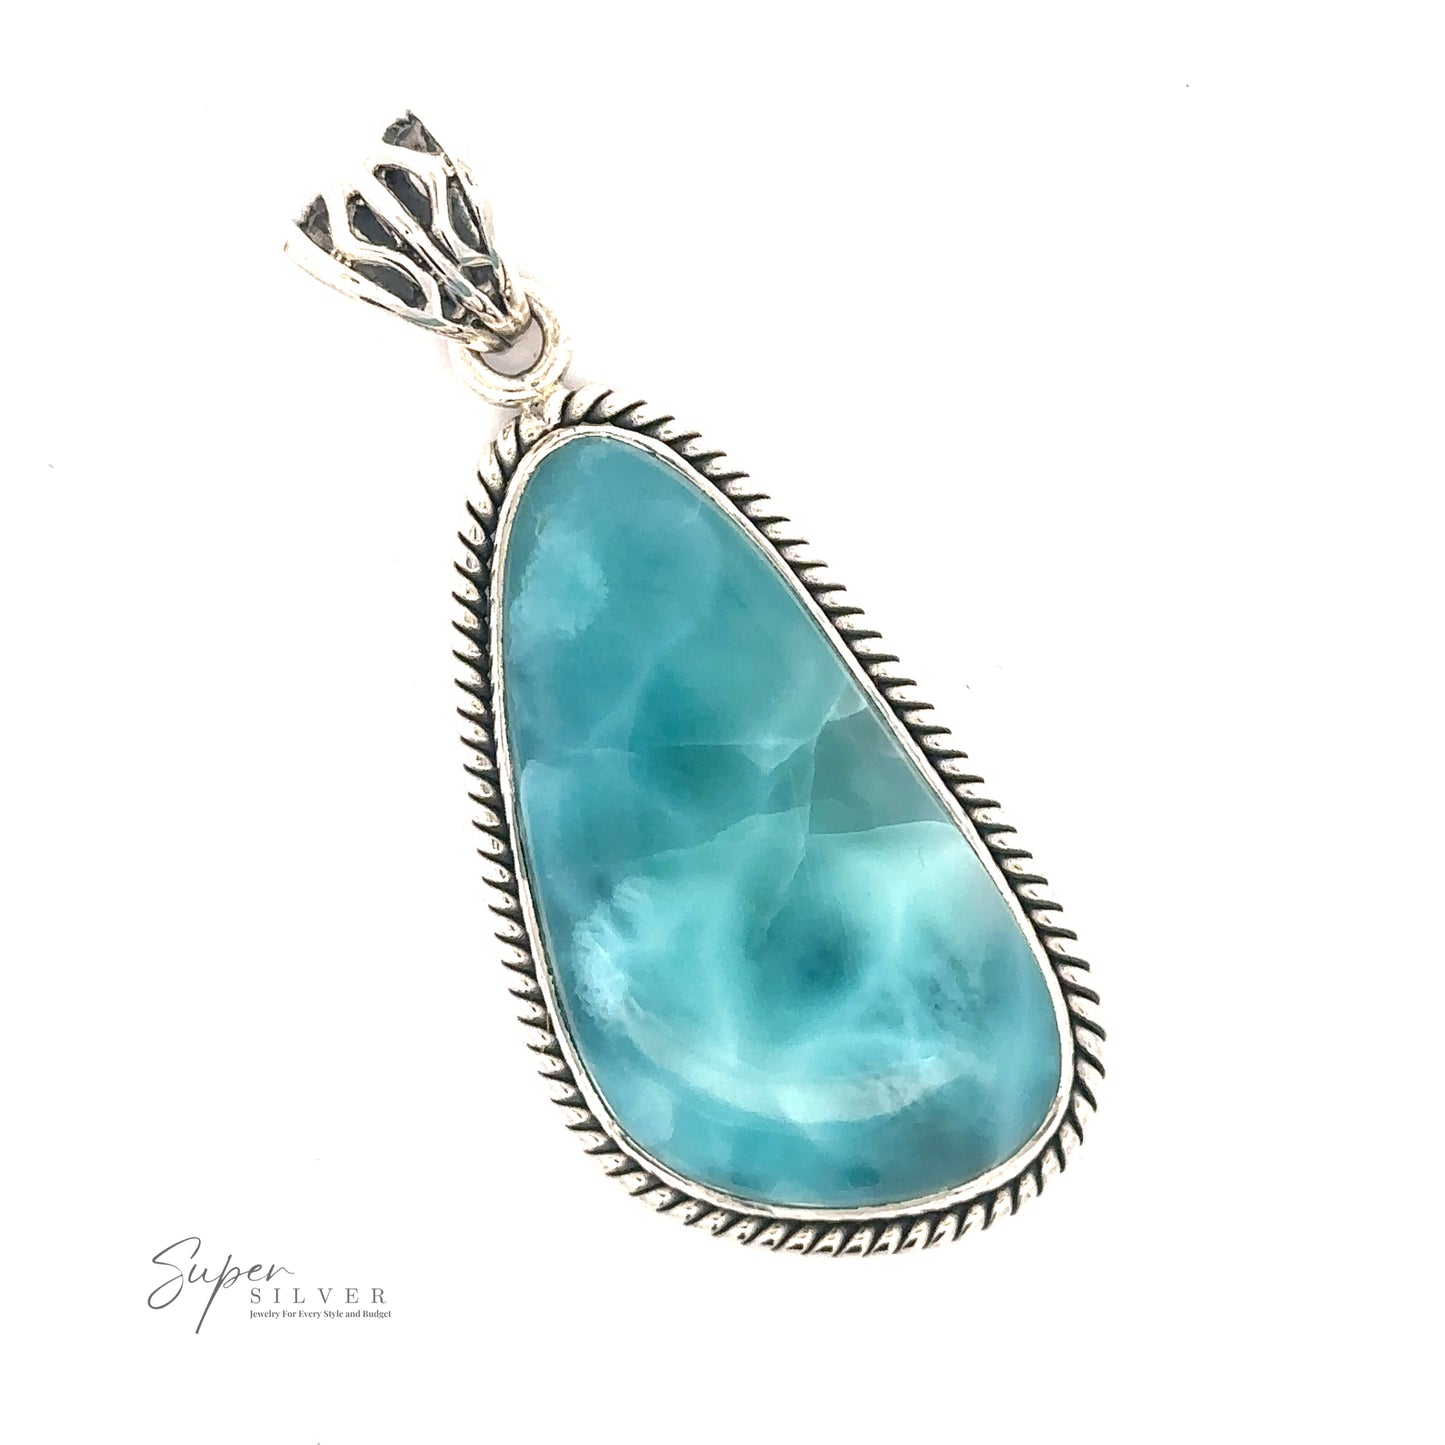 
                  
                    A stunning Larimar Pendant with Rope Border featuring a tear-shaped deep blue gemstone set in an elegant silver frame with a decorative bail at the top.
                  
                